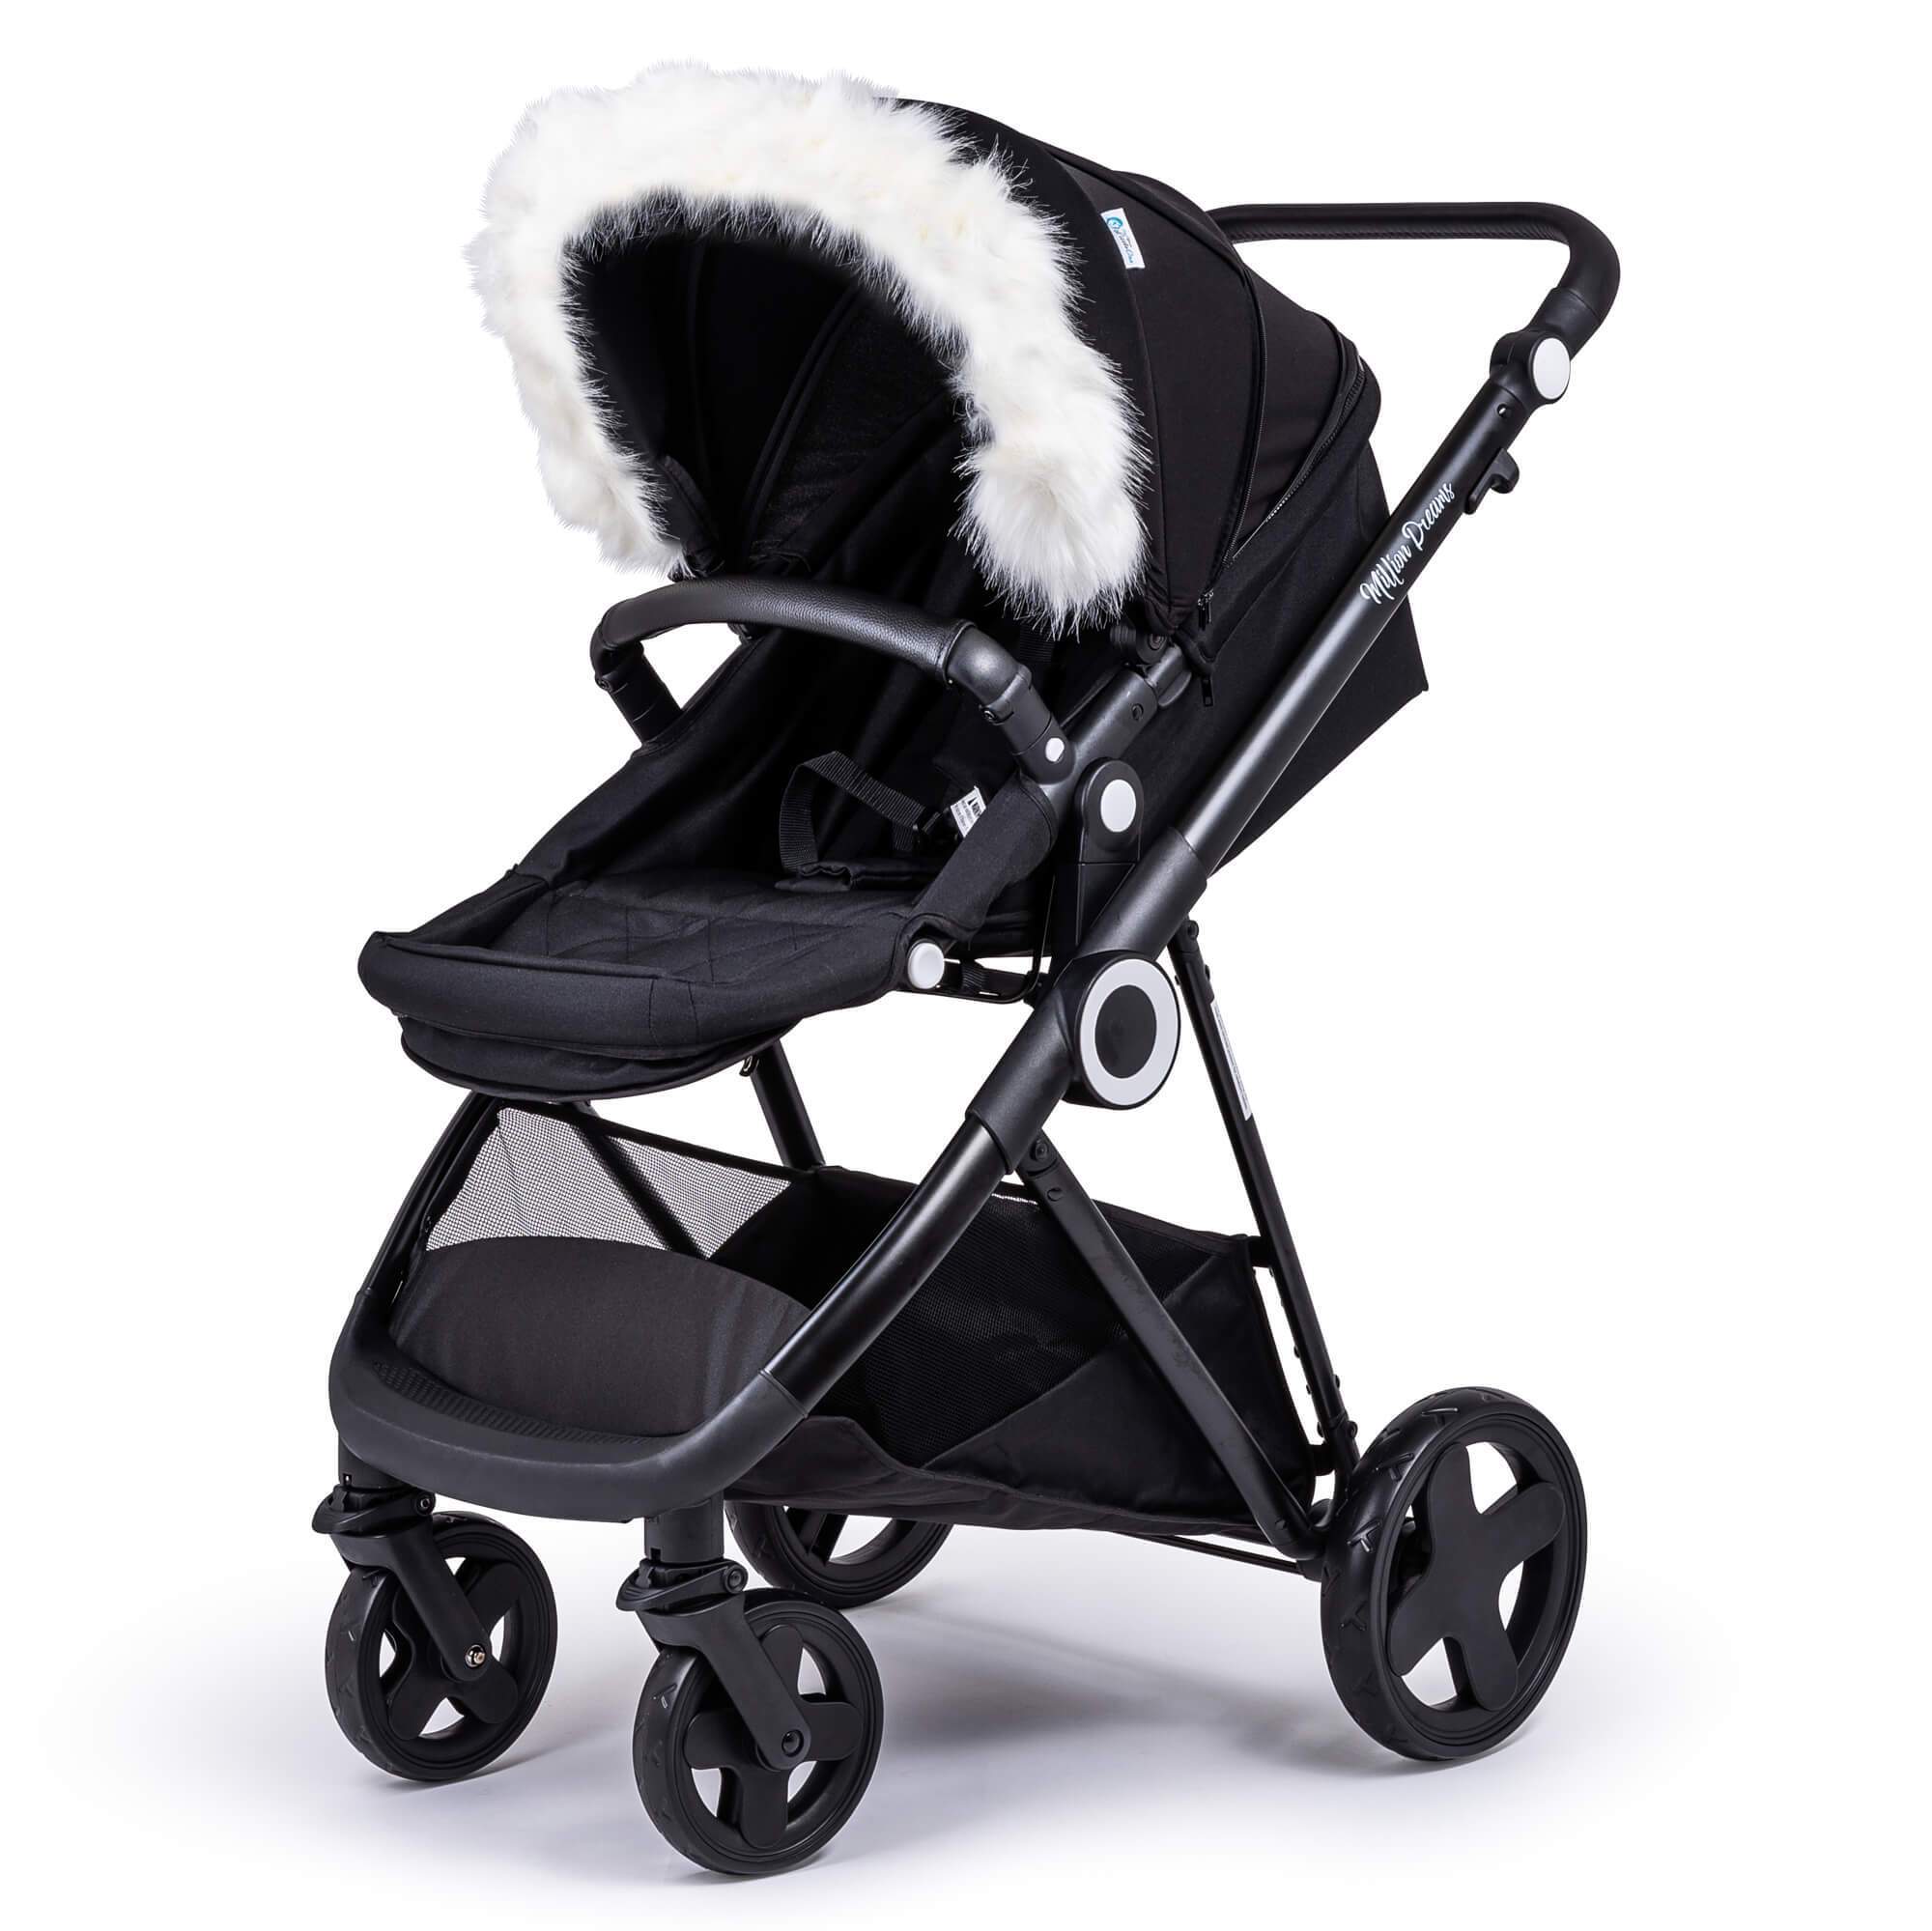 Pram Fur Hood Trim Attachment for Pushchair Compatible with Brio - For Your Little One